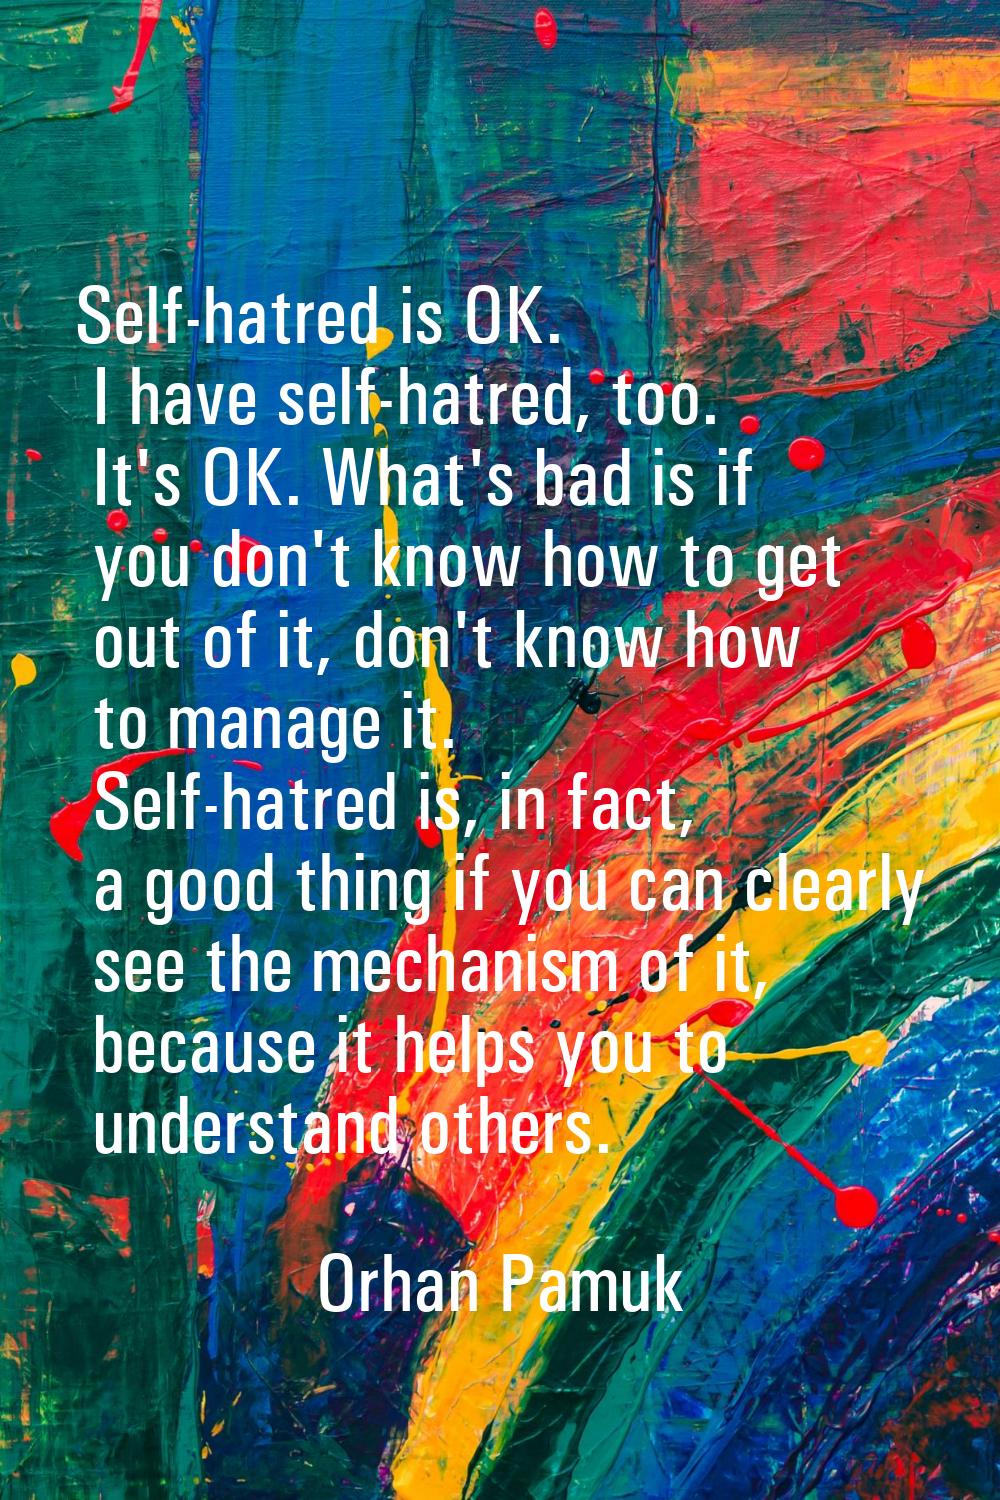 Self-hatred is OK. I have self-hatred, too. It's OK. What's bad is if you don't know how to get out